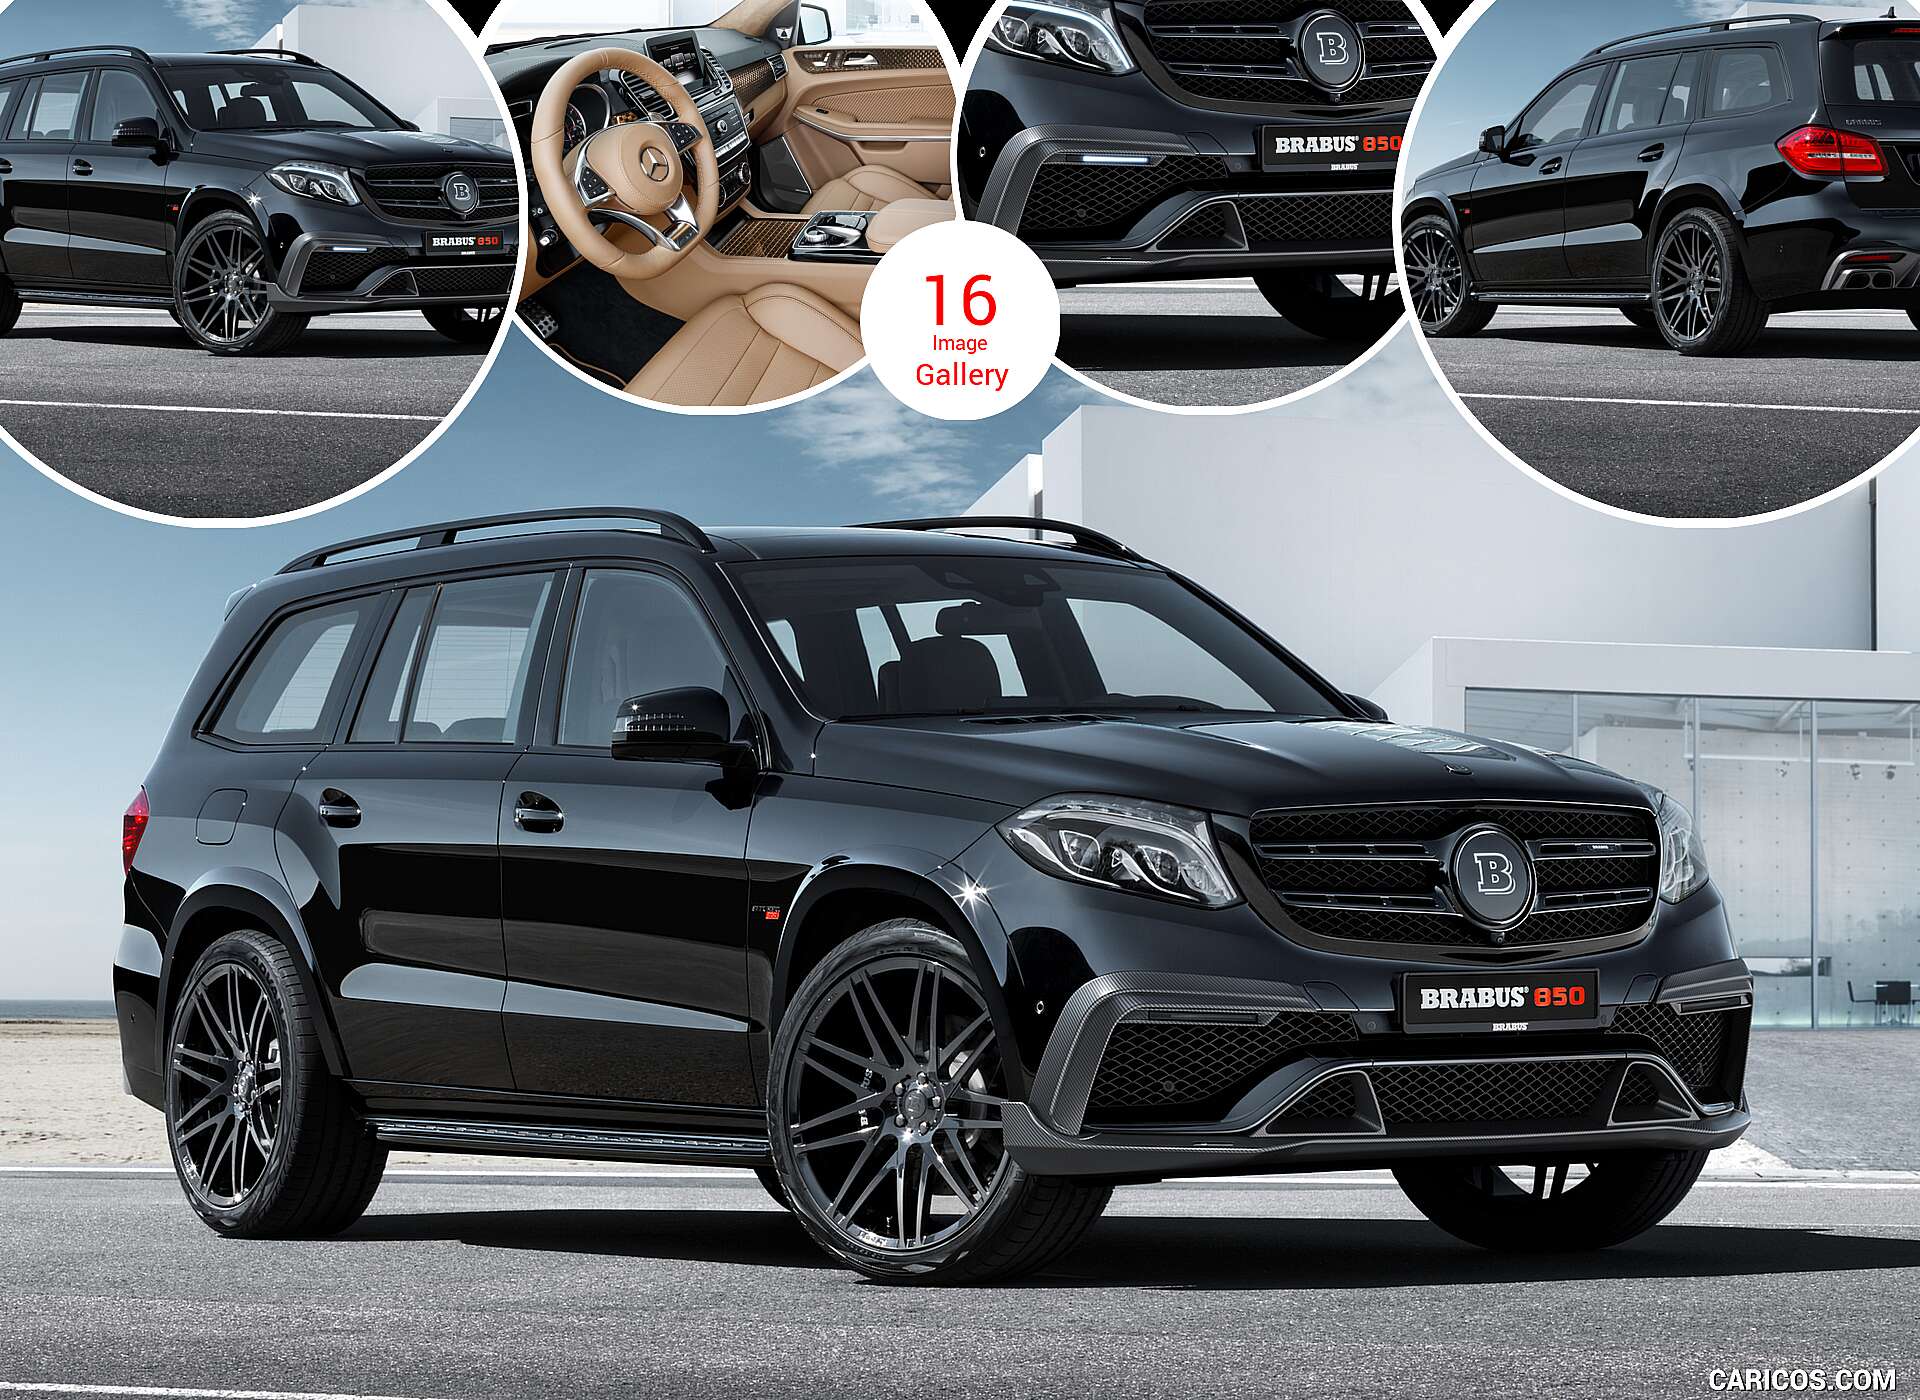 2017 BRABUS 850 XL based on the Mercedes-Benz GLS 63 4MATIC